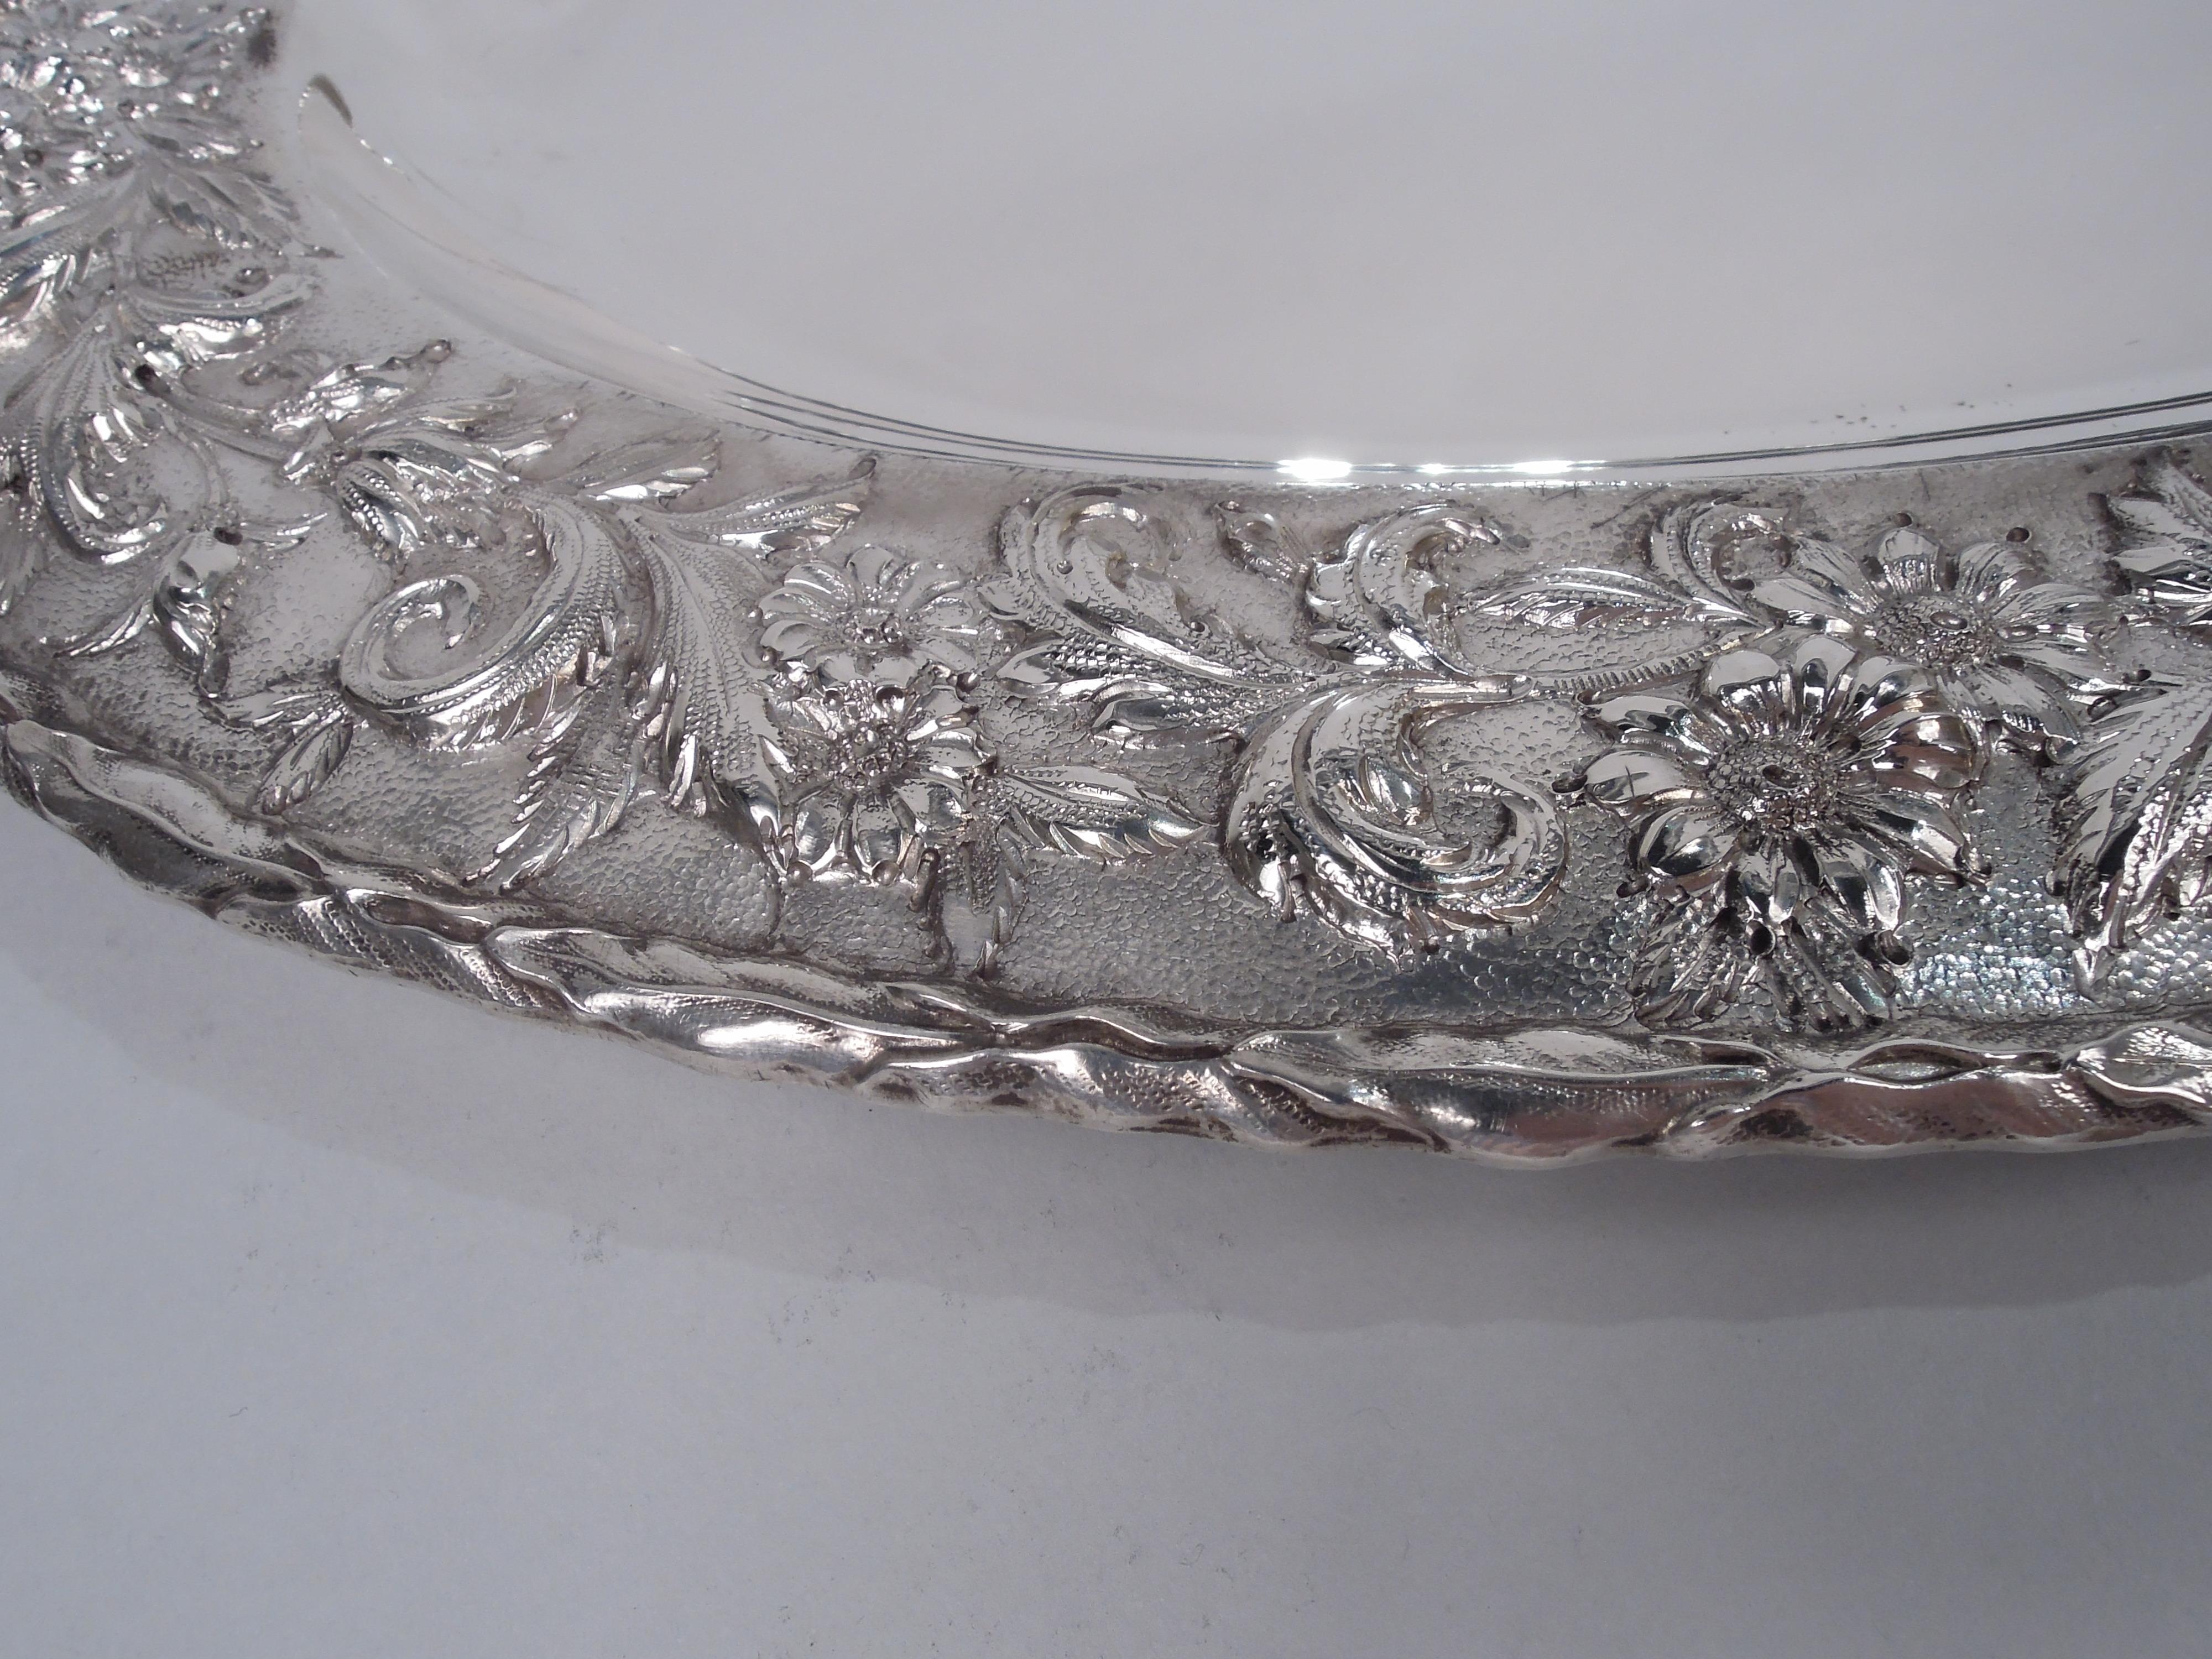 Edwardian sterling silver tray. Made by S. Kirk & Son Inc. in Baltimore. Oval well and wide shoulder with repousse floral garland on stippled ground; imbricated leaf rim. Fully marked including maker’s stamp (1925-32), no. 2517, and phrase “Hand